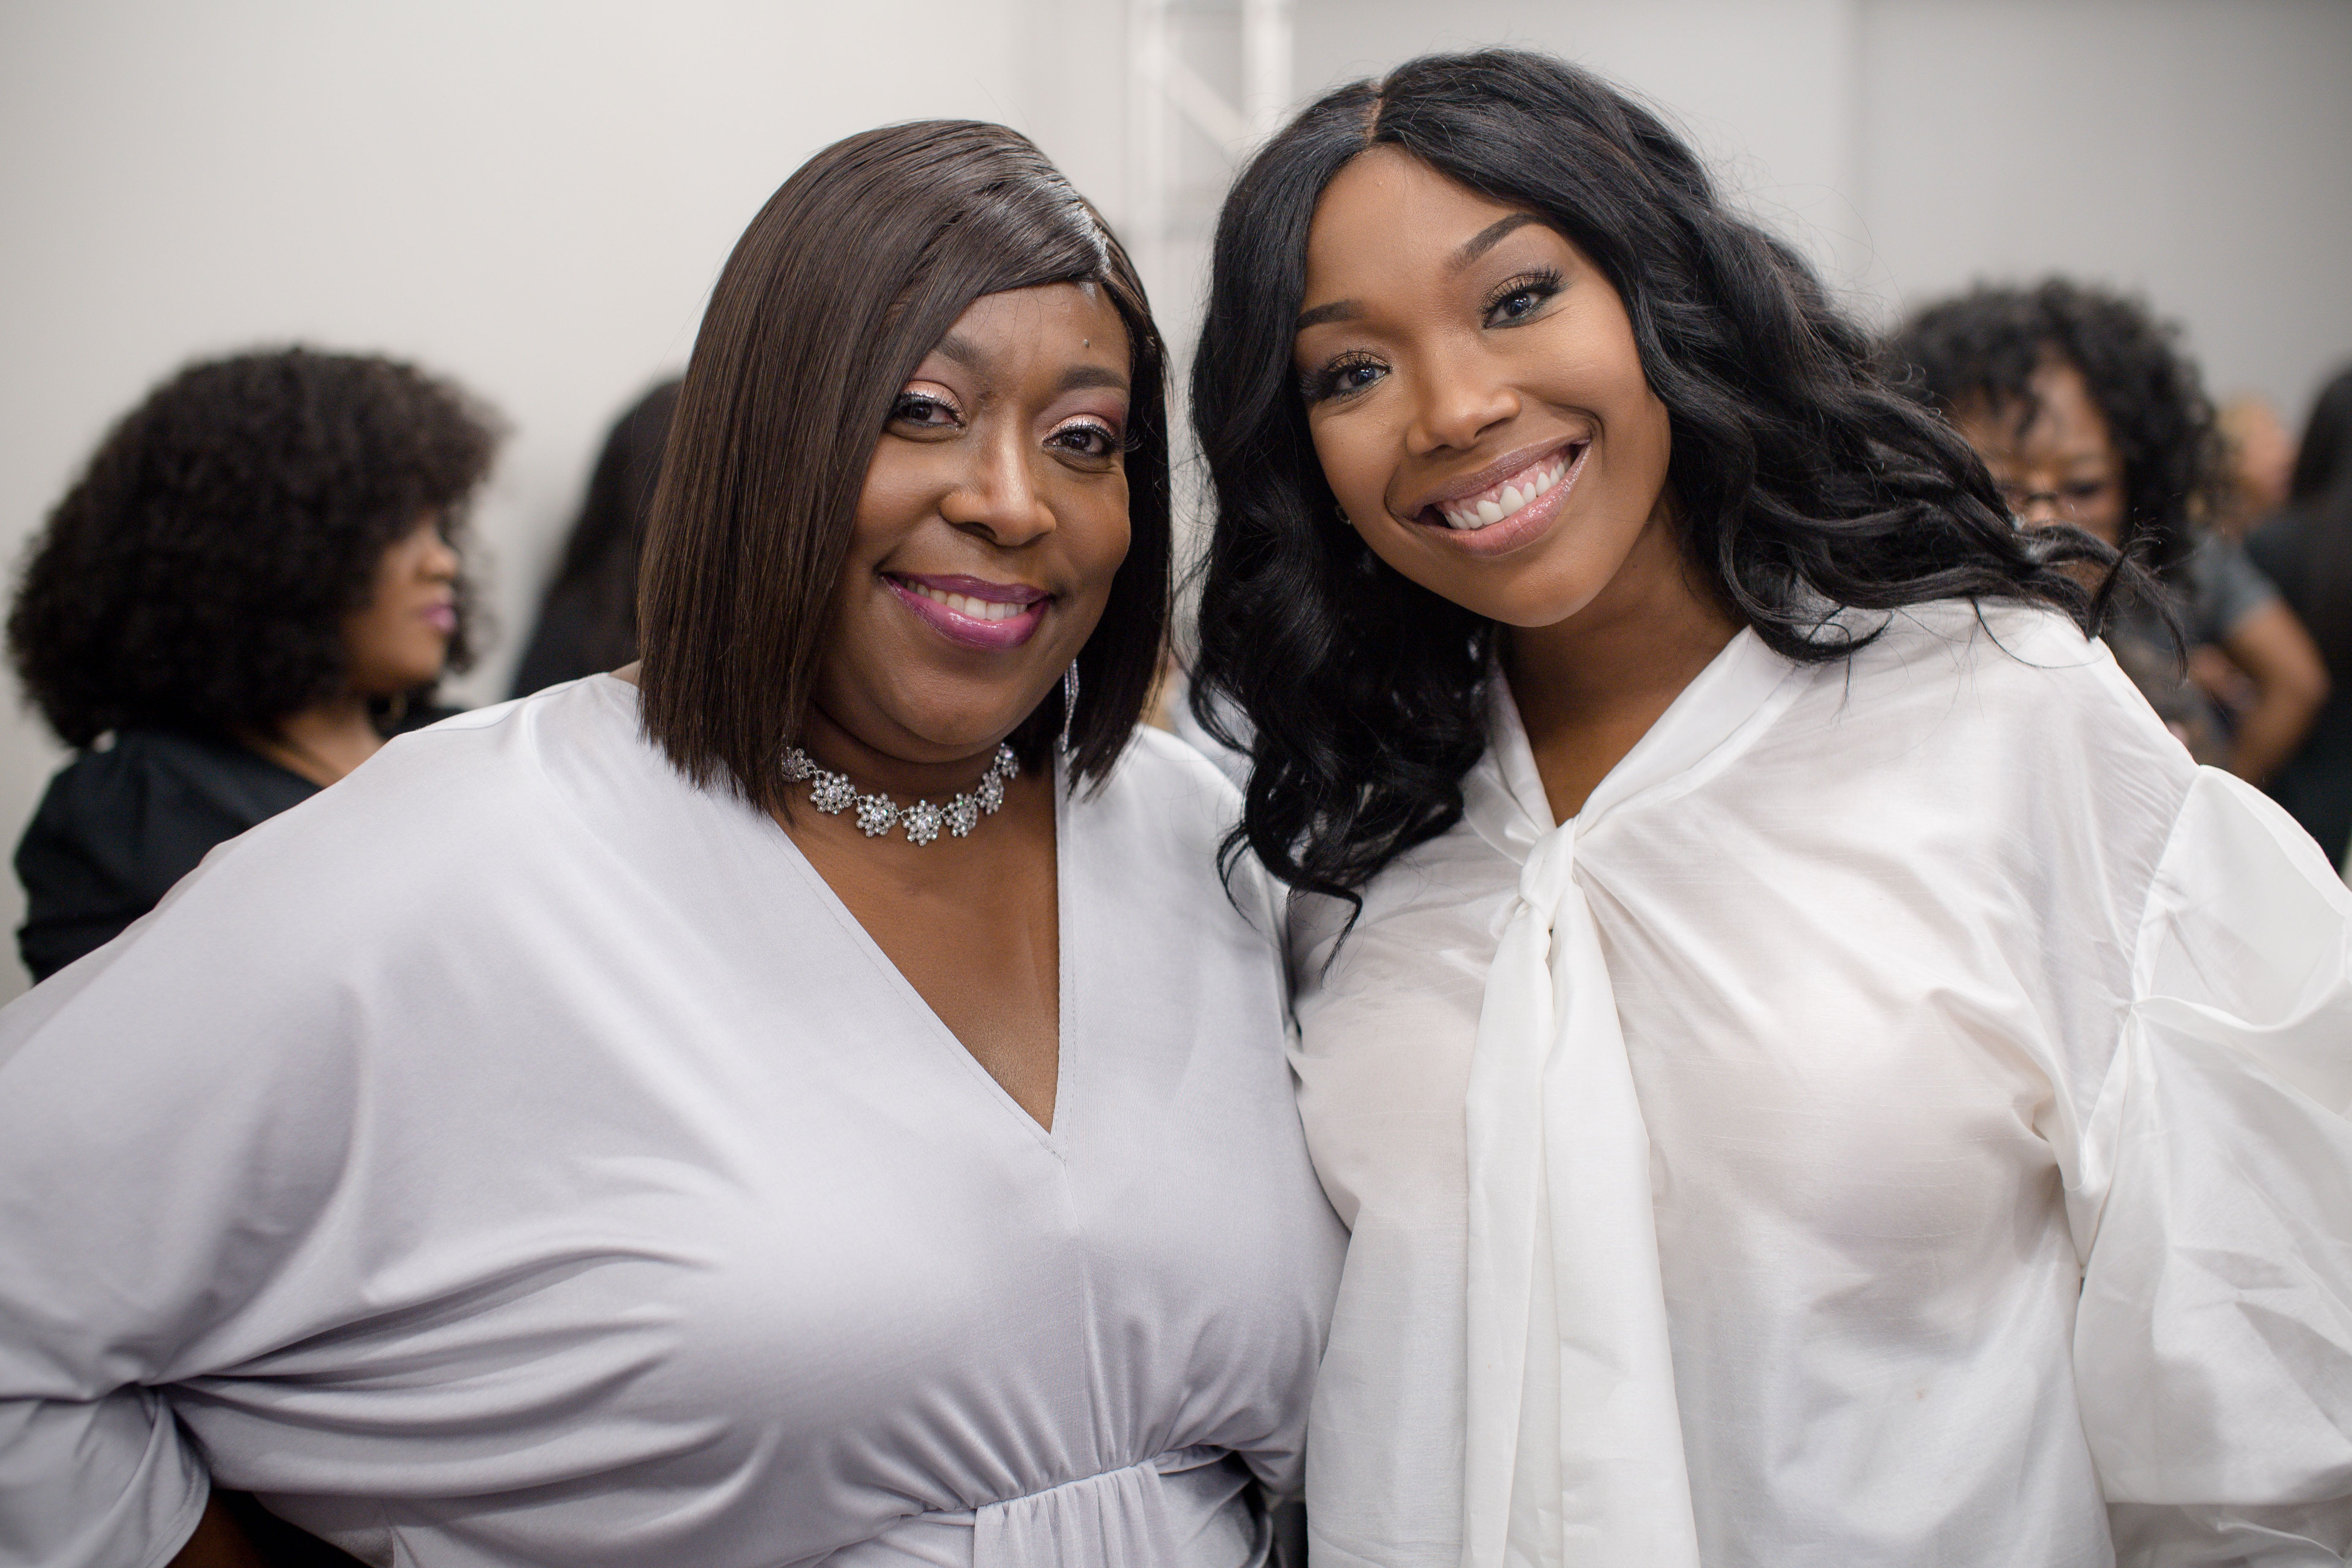 Brandy, Loni Love, Rihanna, and More Celebs Out and About